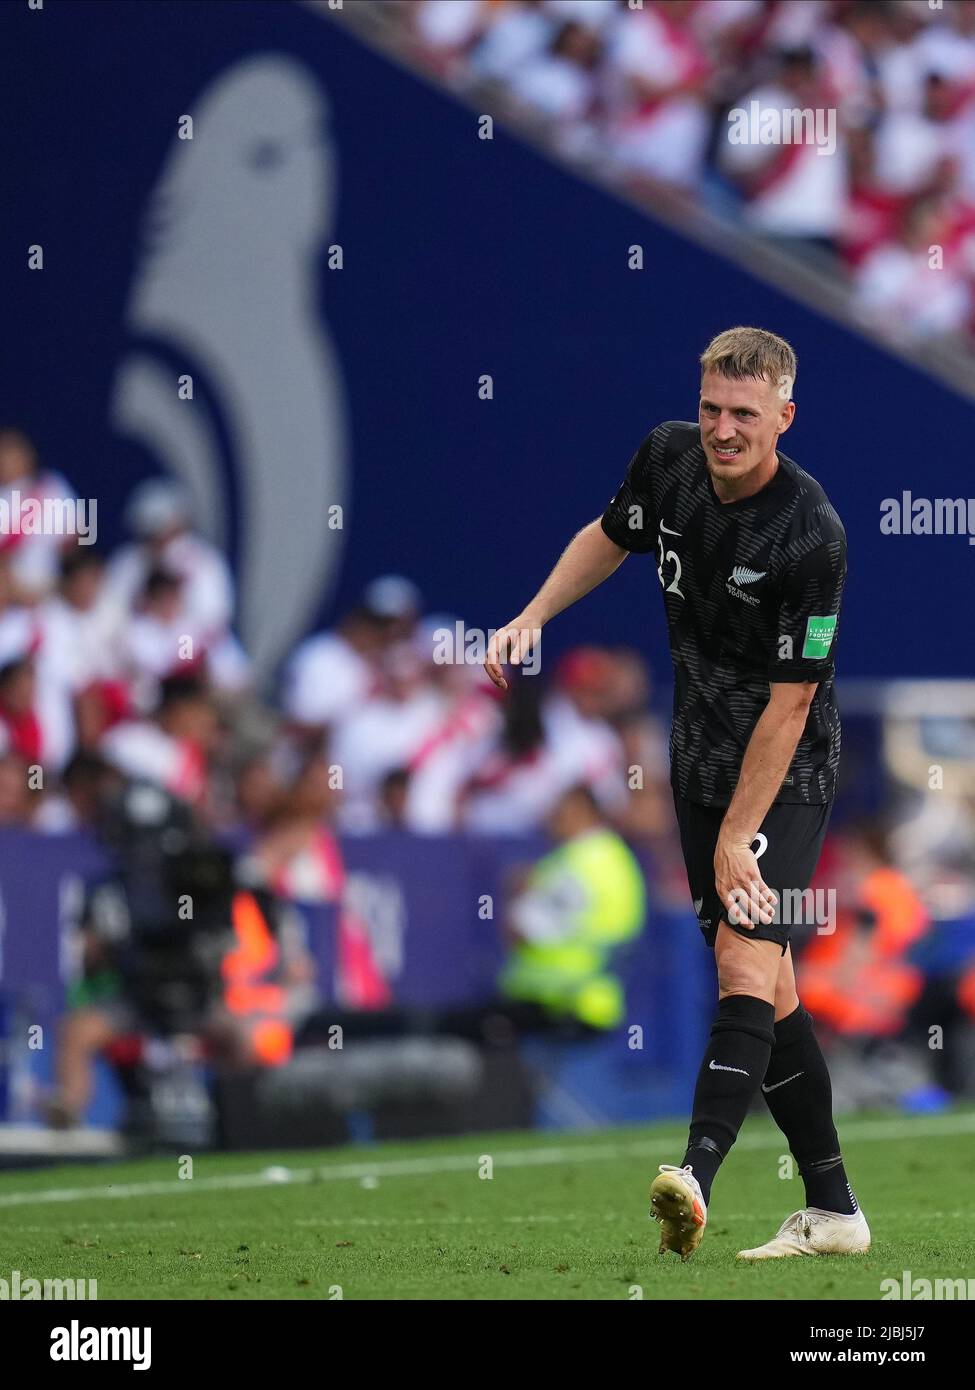 Niko Kirwan of New Zealand during the friendly match between Peru and New Zealand played at RCDE Stadium on June 5, 2022 in Barcelona, Spain. (Photo by Bagu Blanco / PRESSINPHOTO) Stock Photo